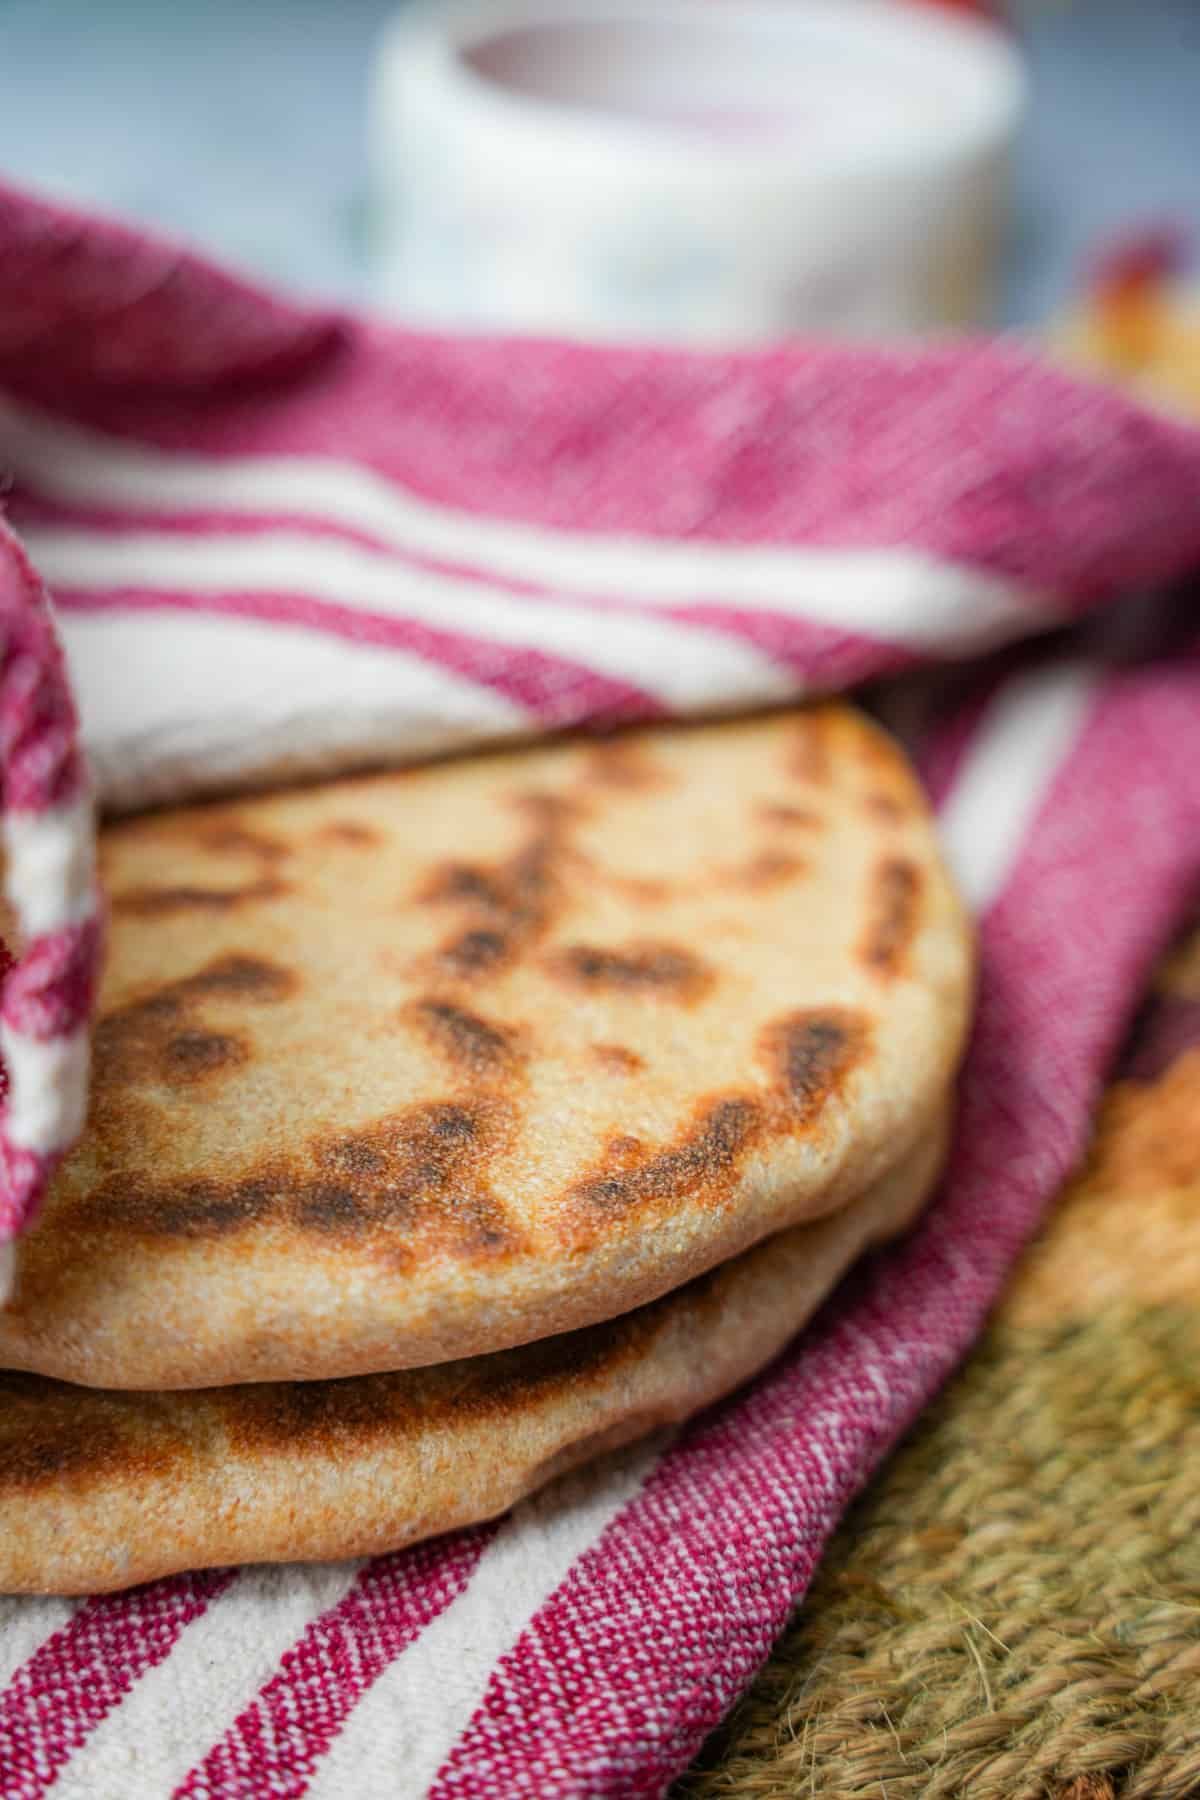 Finished pita breads are kept warm wrapped in a kitchen towel.